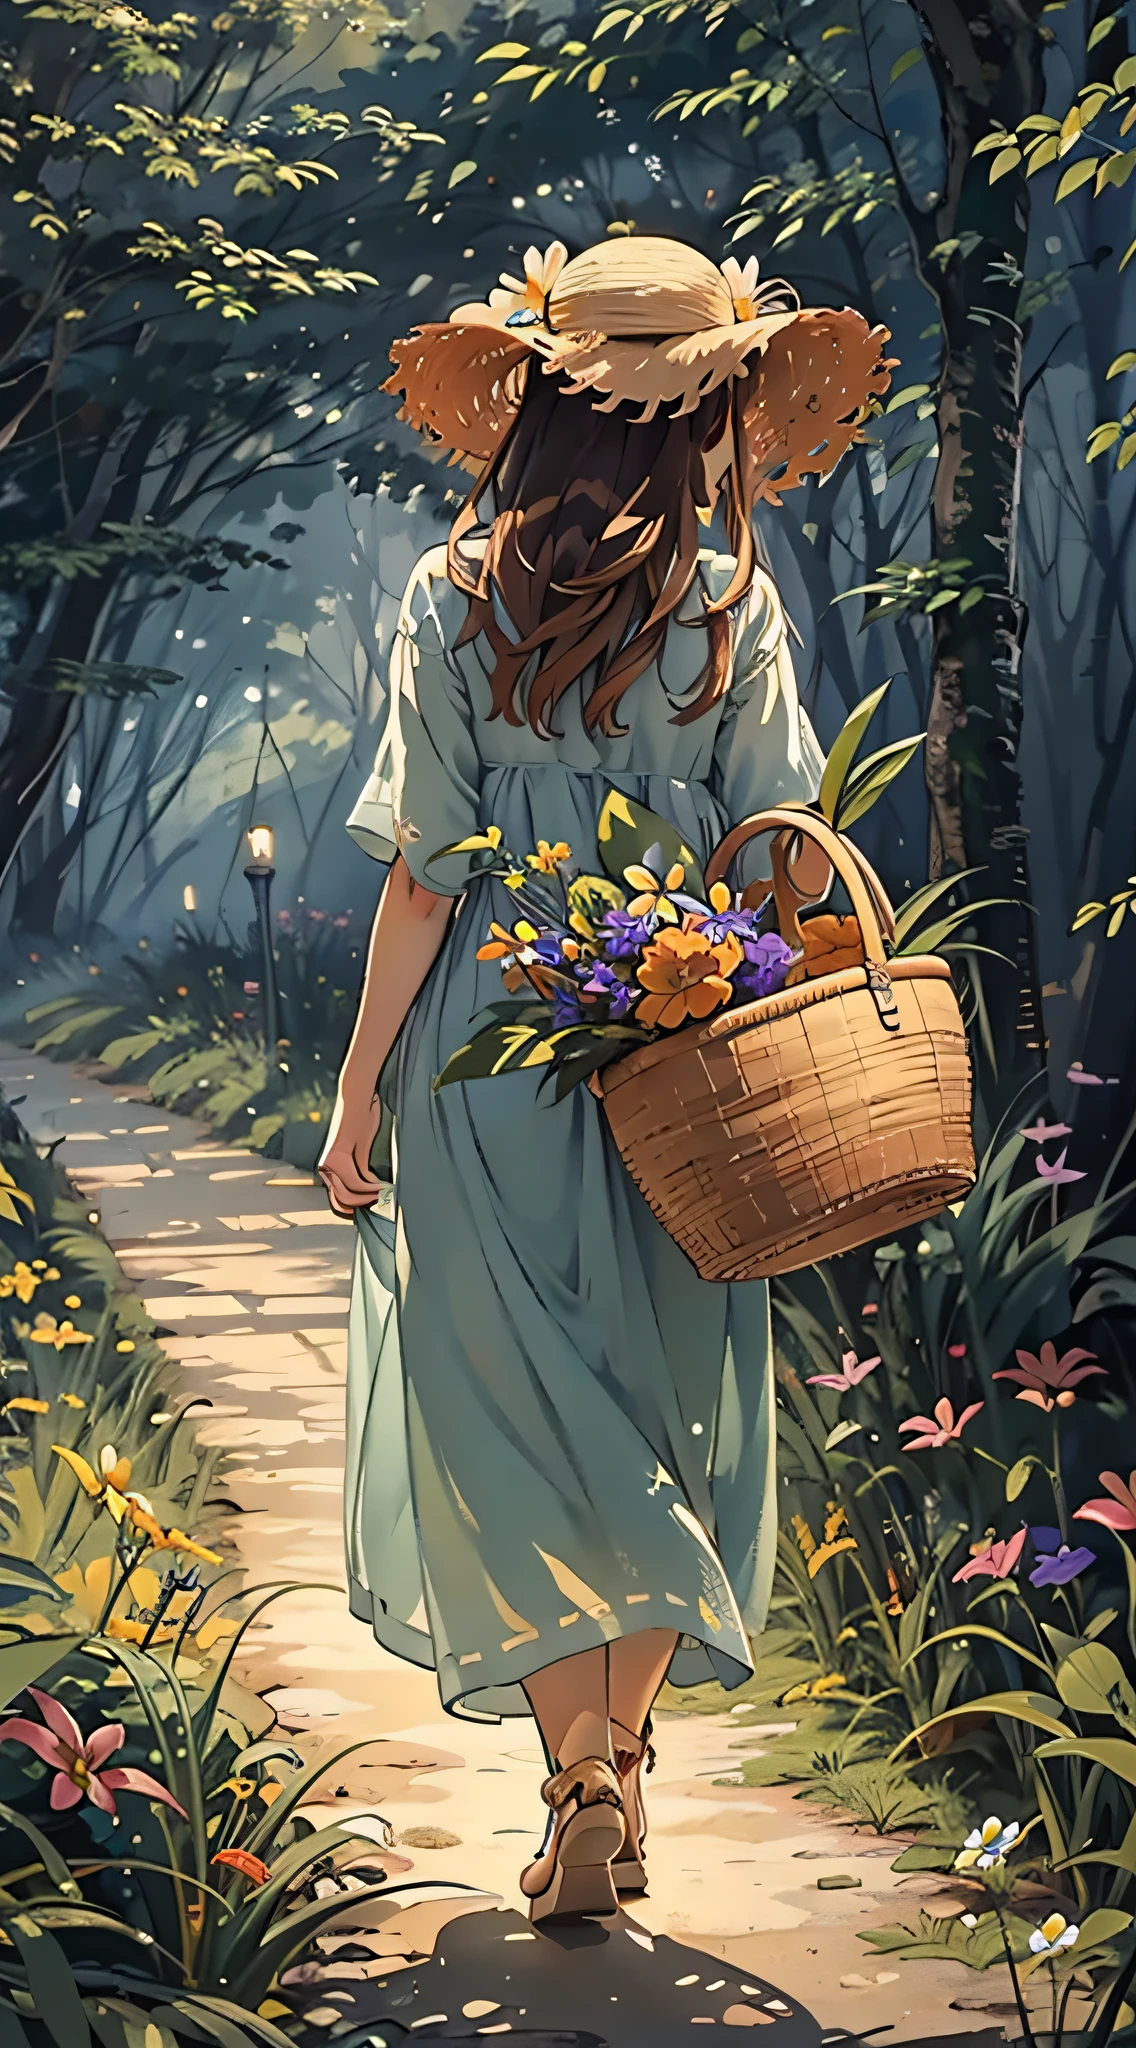 There is a back view of a beautiful girl with a basket walking on a grass path in a dimly lit forest、She wears a straw hat and uses it as a floral hair ornament、At the exit of the forest where she is walking, you can see a paradise of flowers spreading out in the dazzling light.、Looks Back、Masterpiece